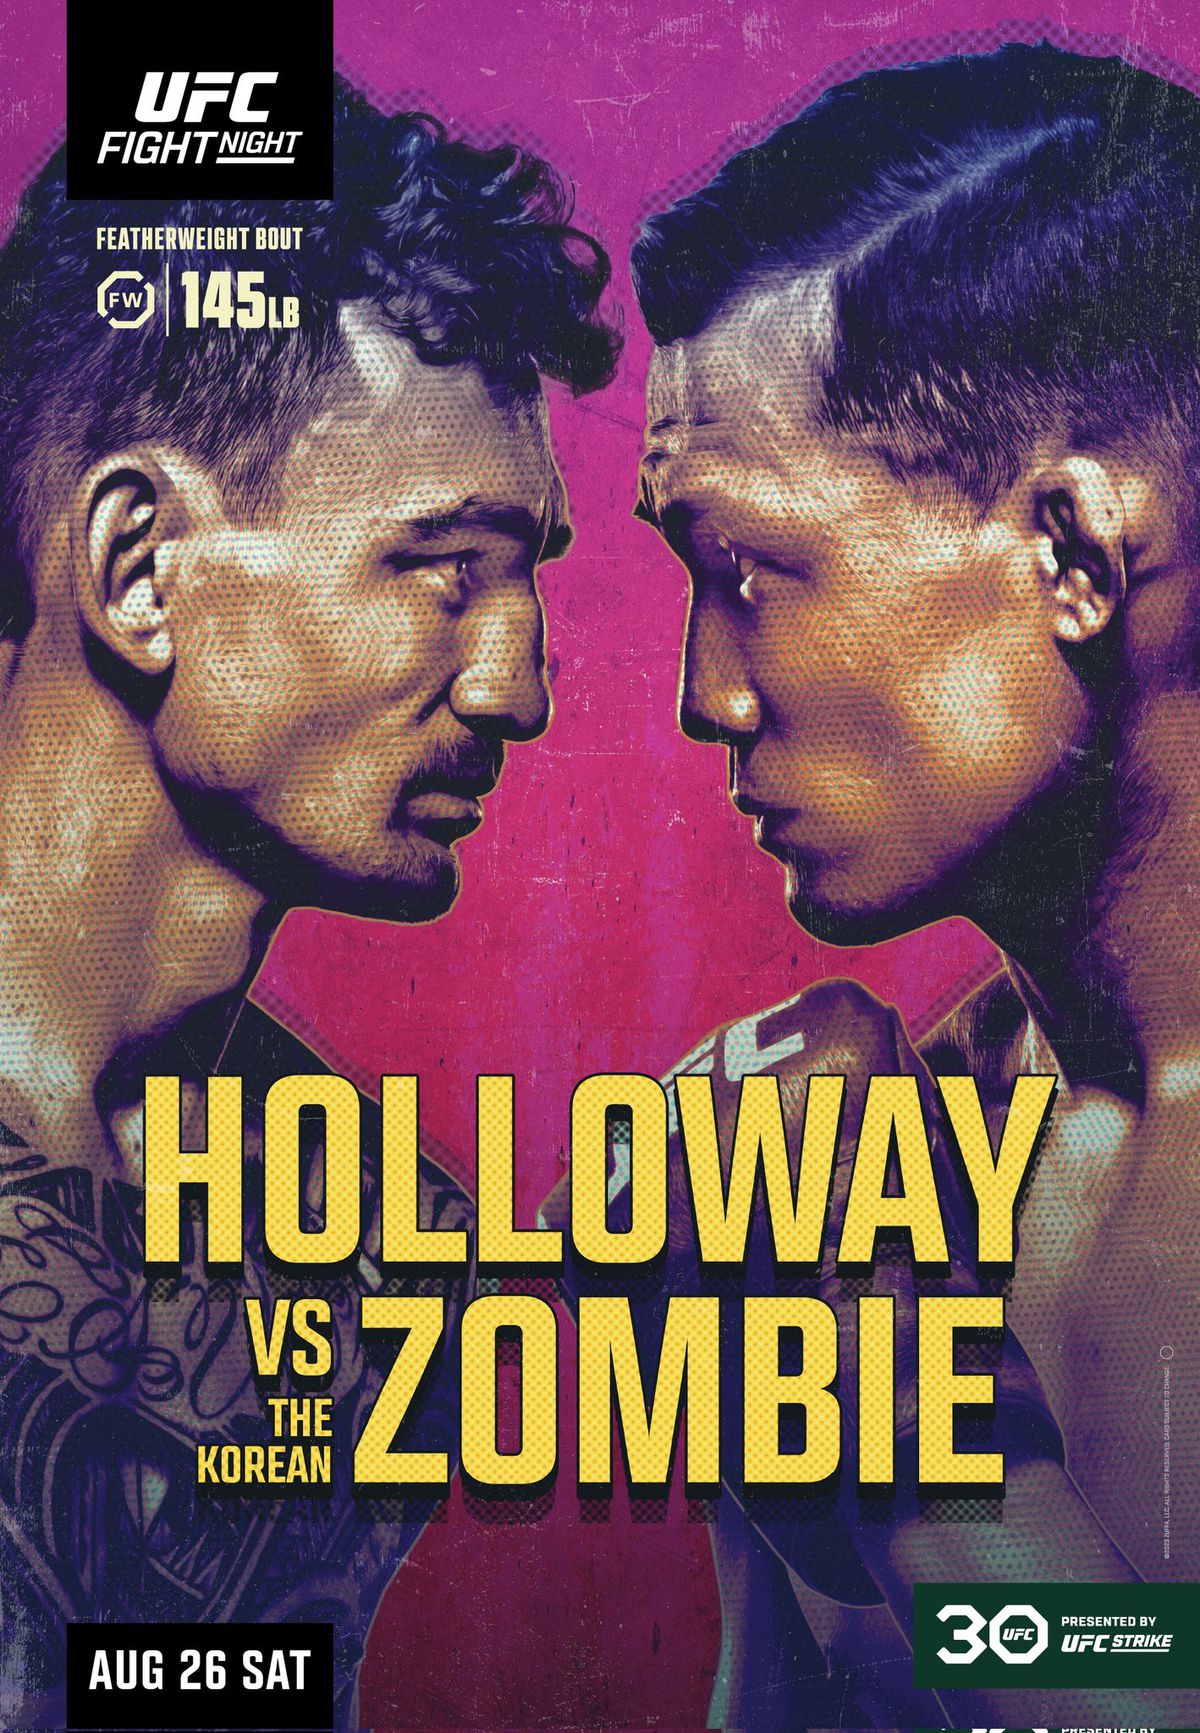 Get hyped! UFC Singapore poster drops for ‘Holloway vs Zombie’ on Aug. 26